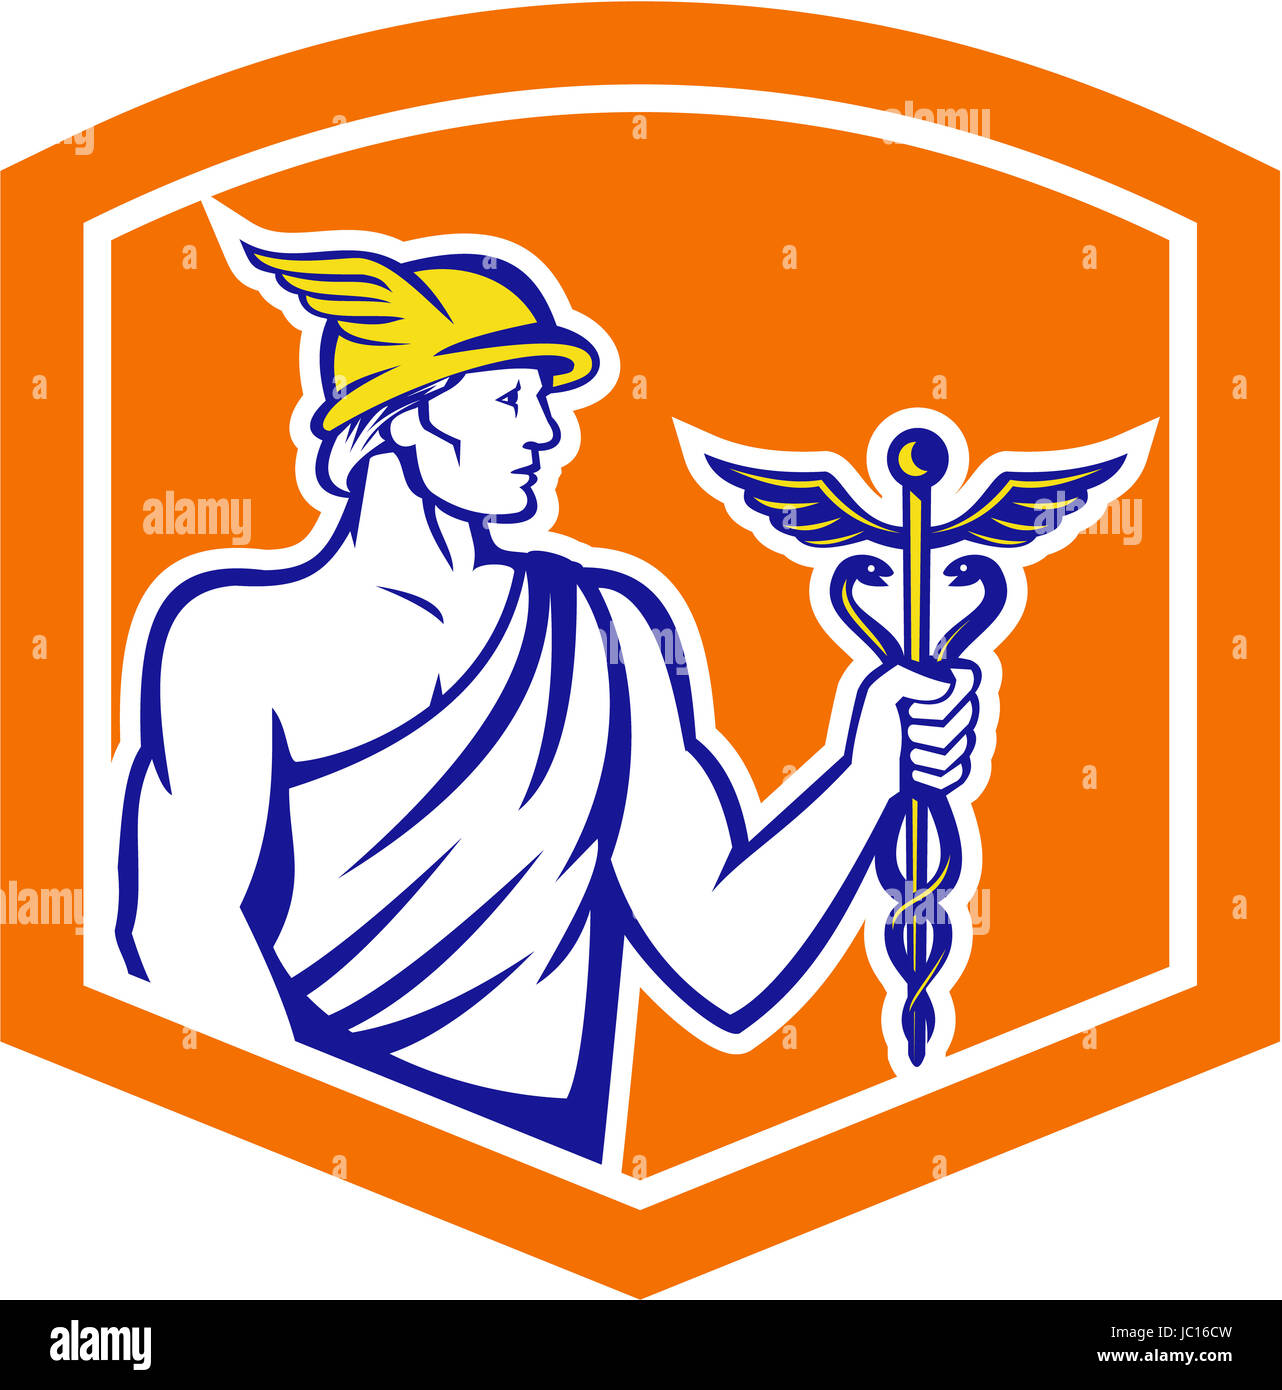 Illustration of Roman god Mercury patron god of financial gain, commerce, communication and travelers wearing winged hat and holding caduceus a herald's staff with two entwined snakes looking to side set inside crest shield done in retro style. Stock Photo